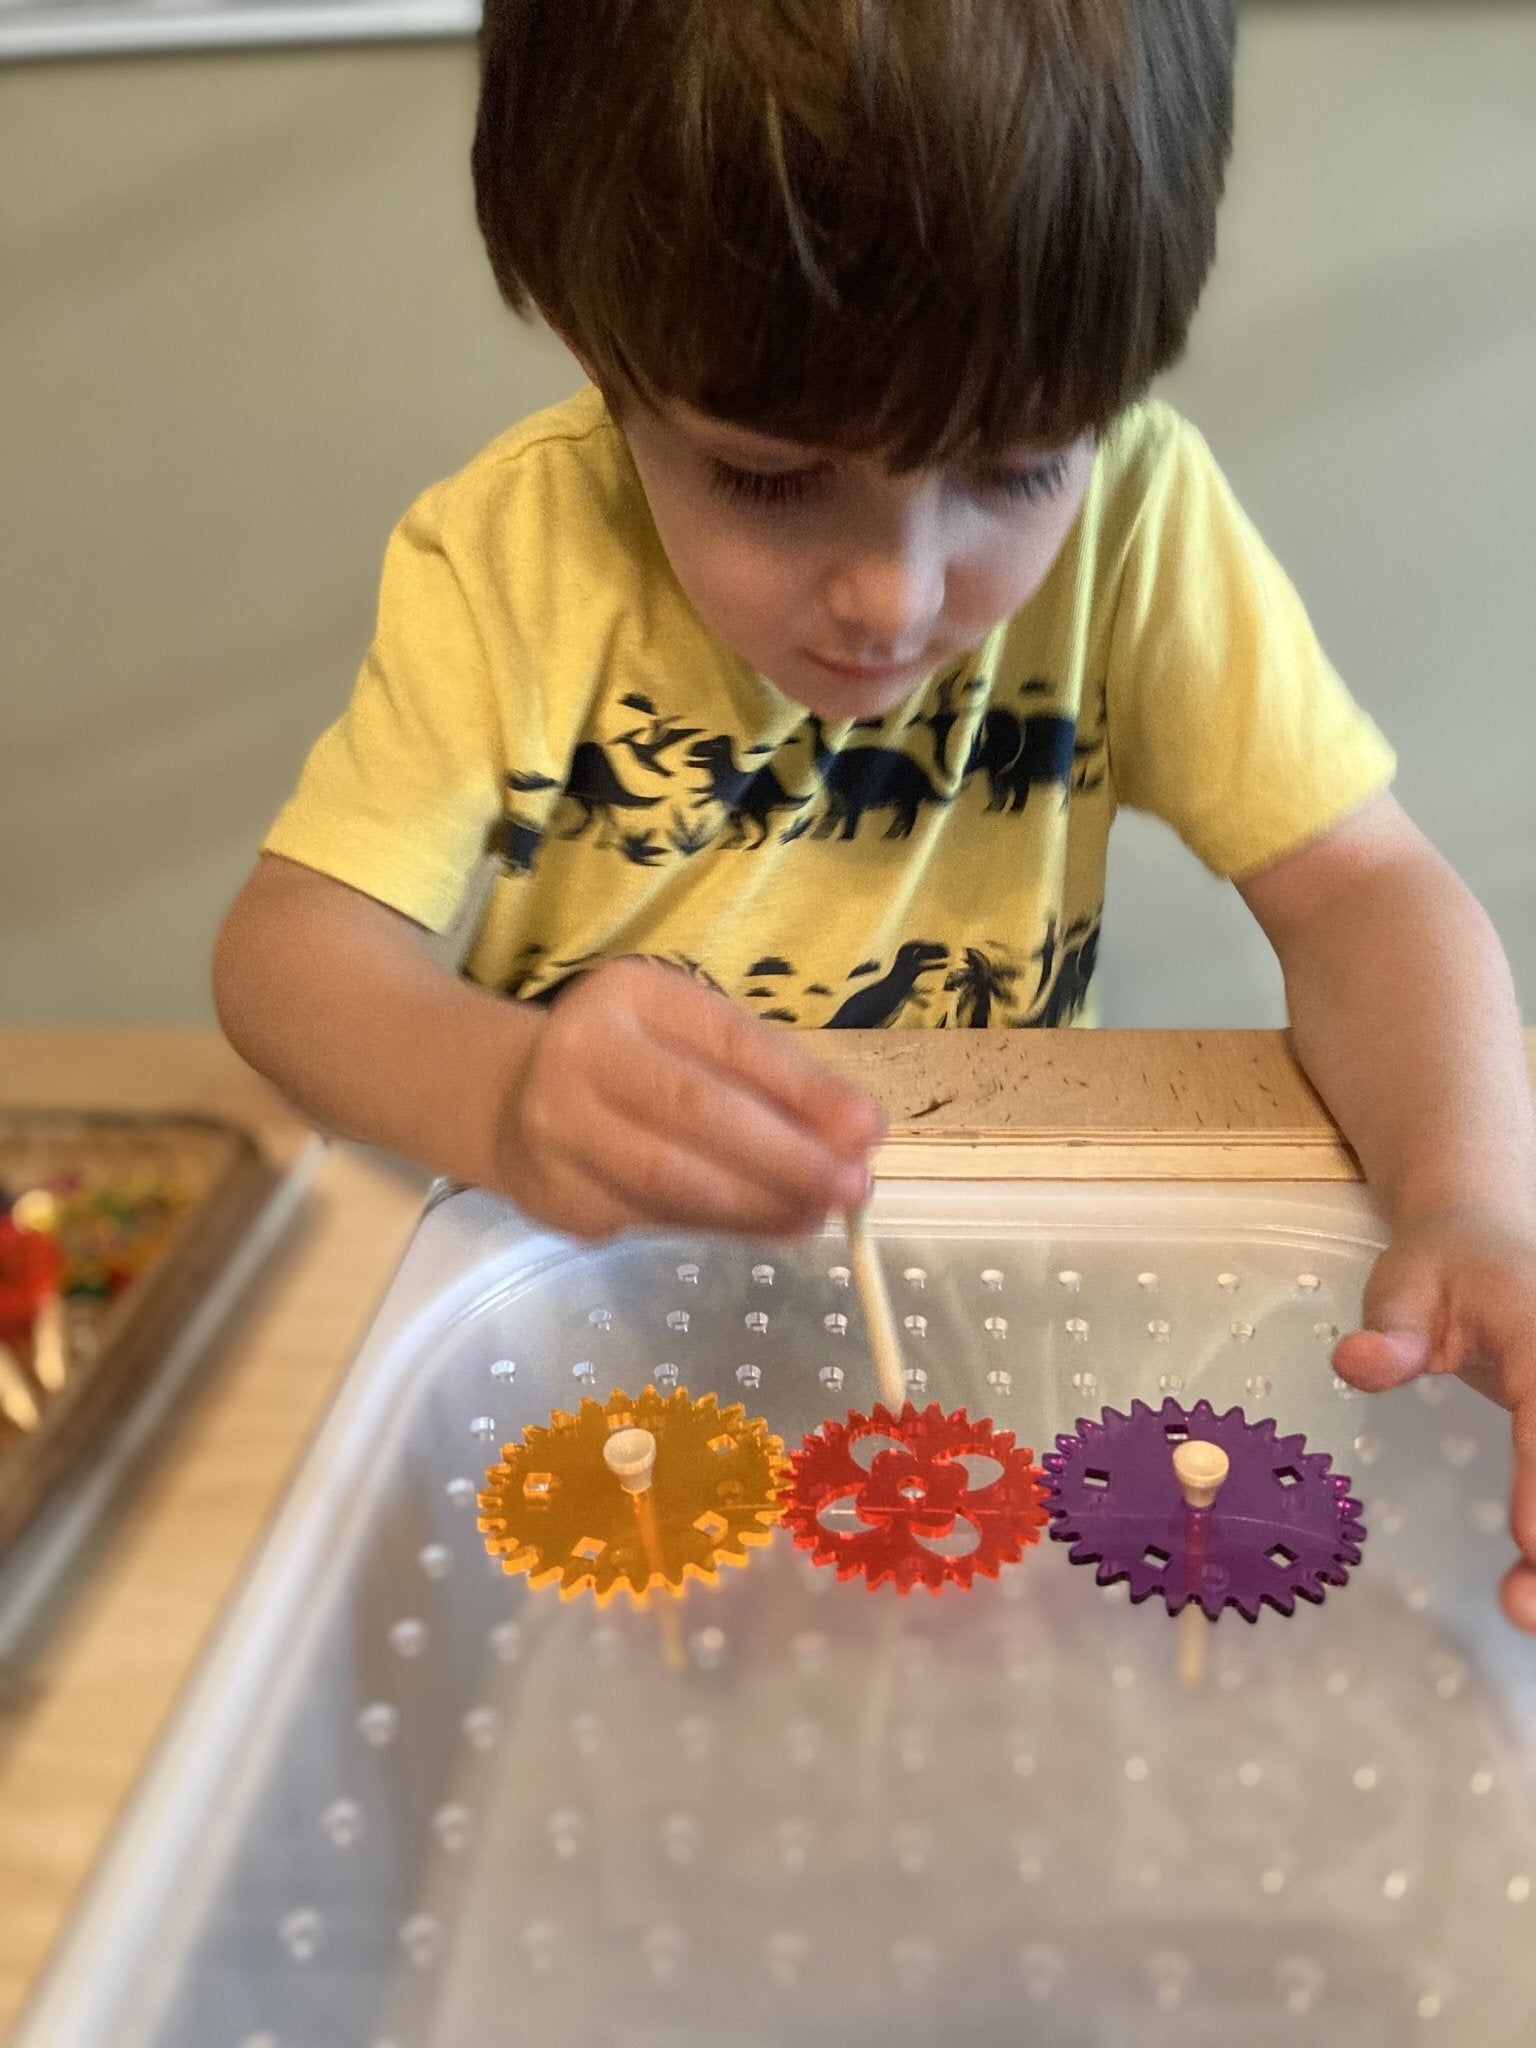 A Pegboard for Kids is a Great Fine Motor Skill Activity